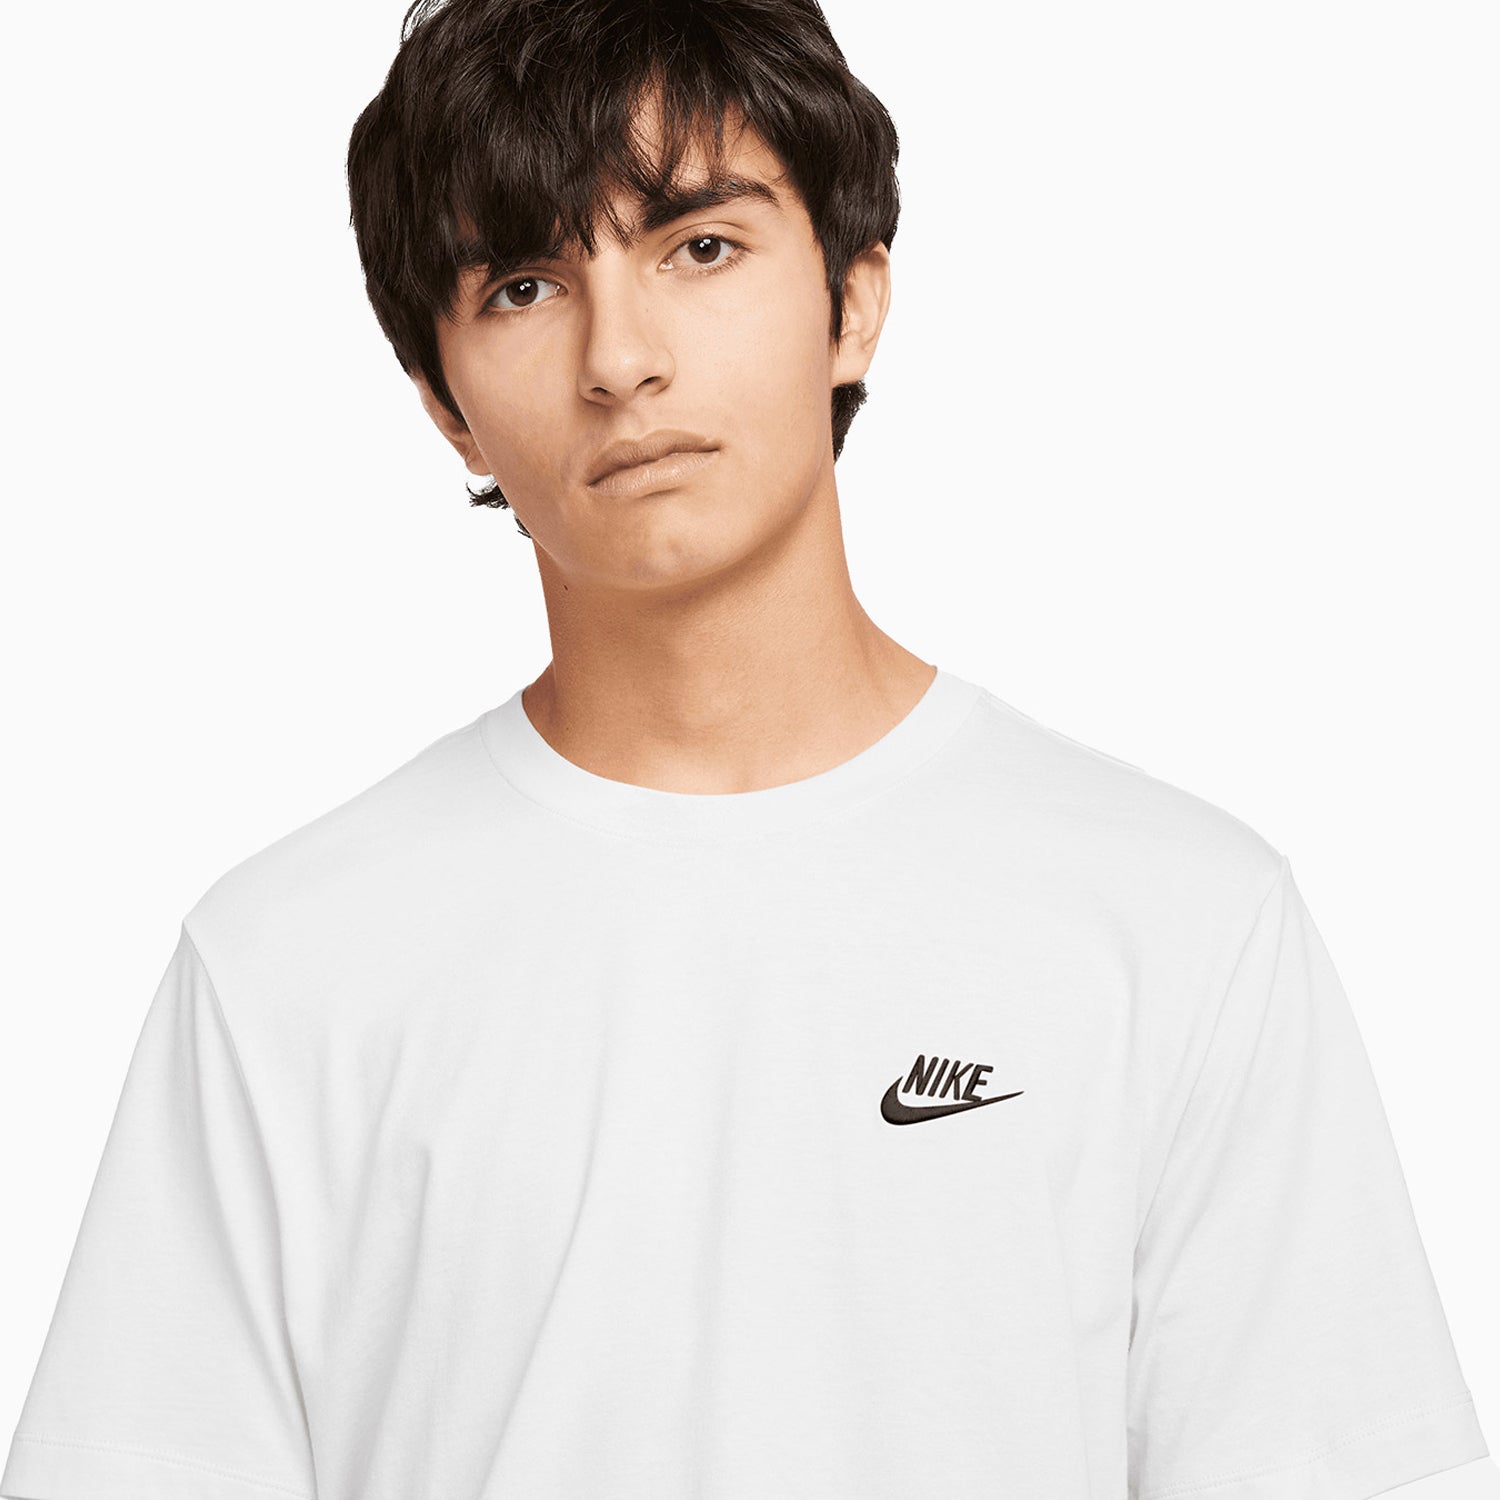 nike-mens-sportswear-t-shirt-and-shorts-outfit-ar4997-101-fb8171-010